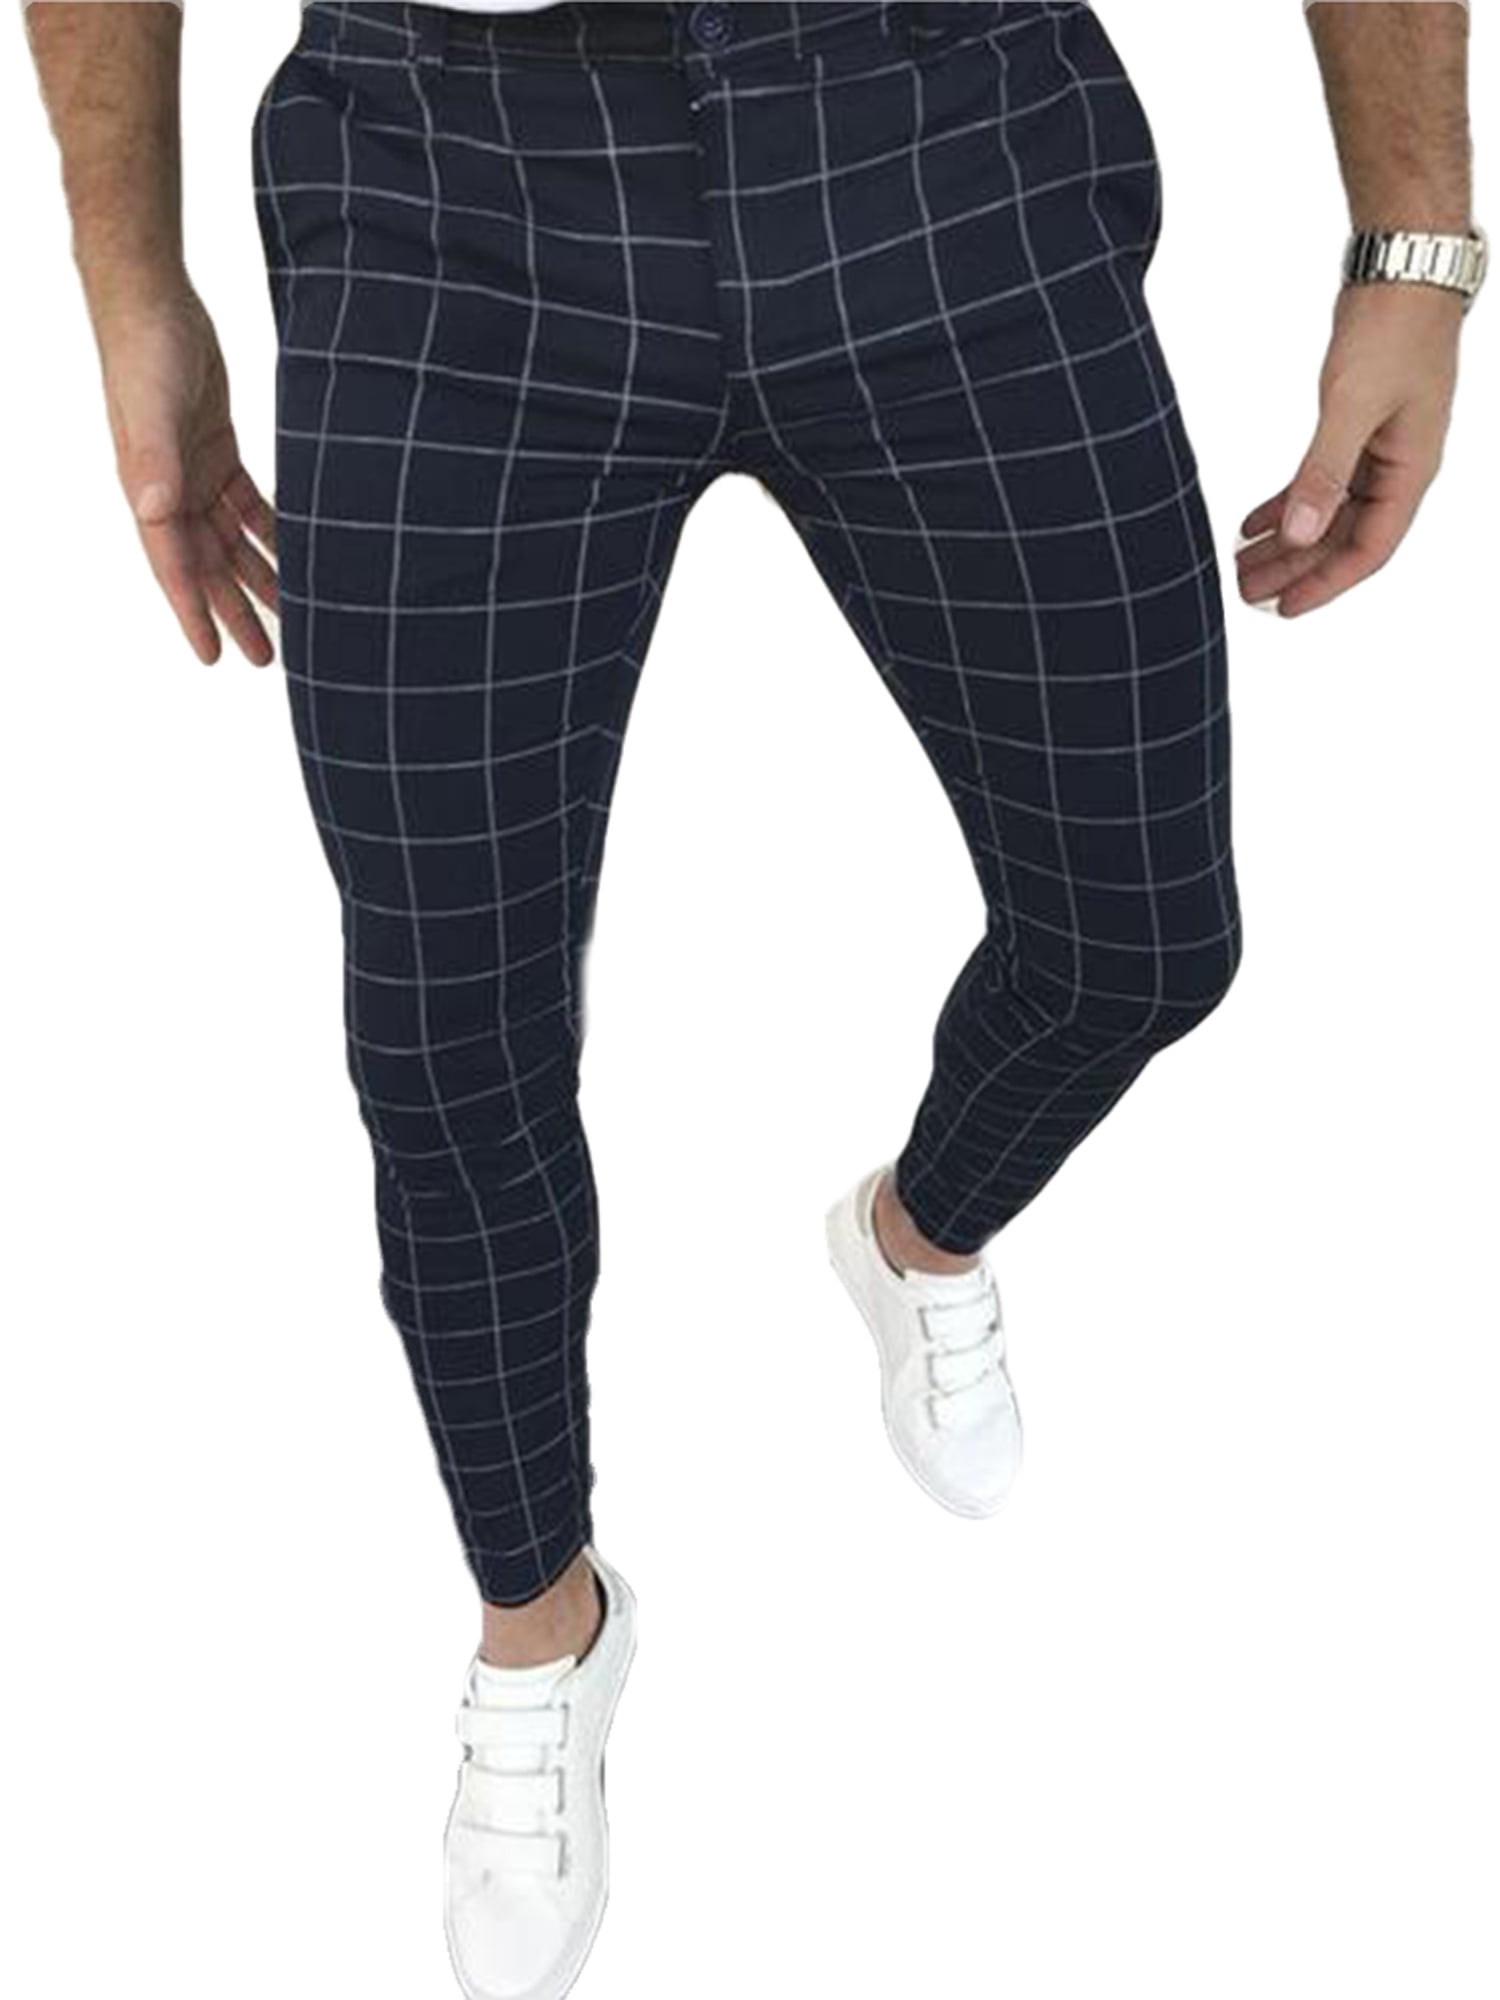 Ma&Baby - Trousers for Men Plaid High Waist Skinny Pants Casual Pants ...